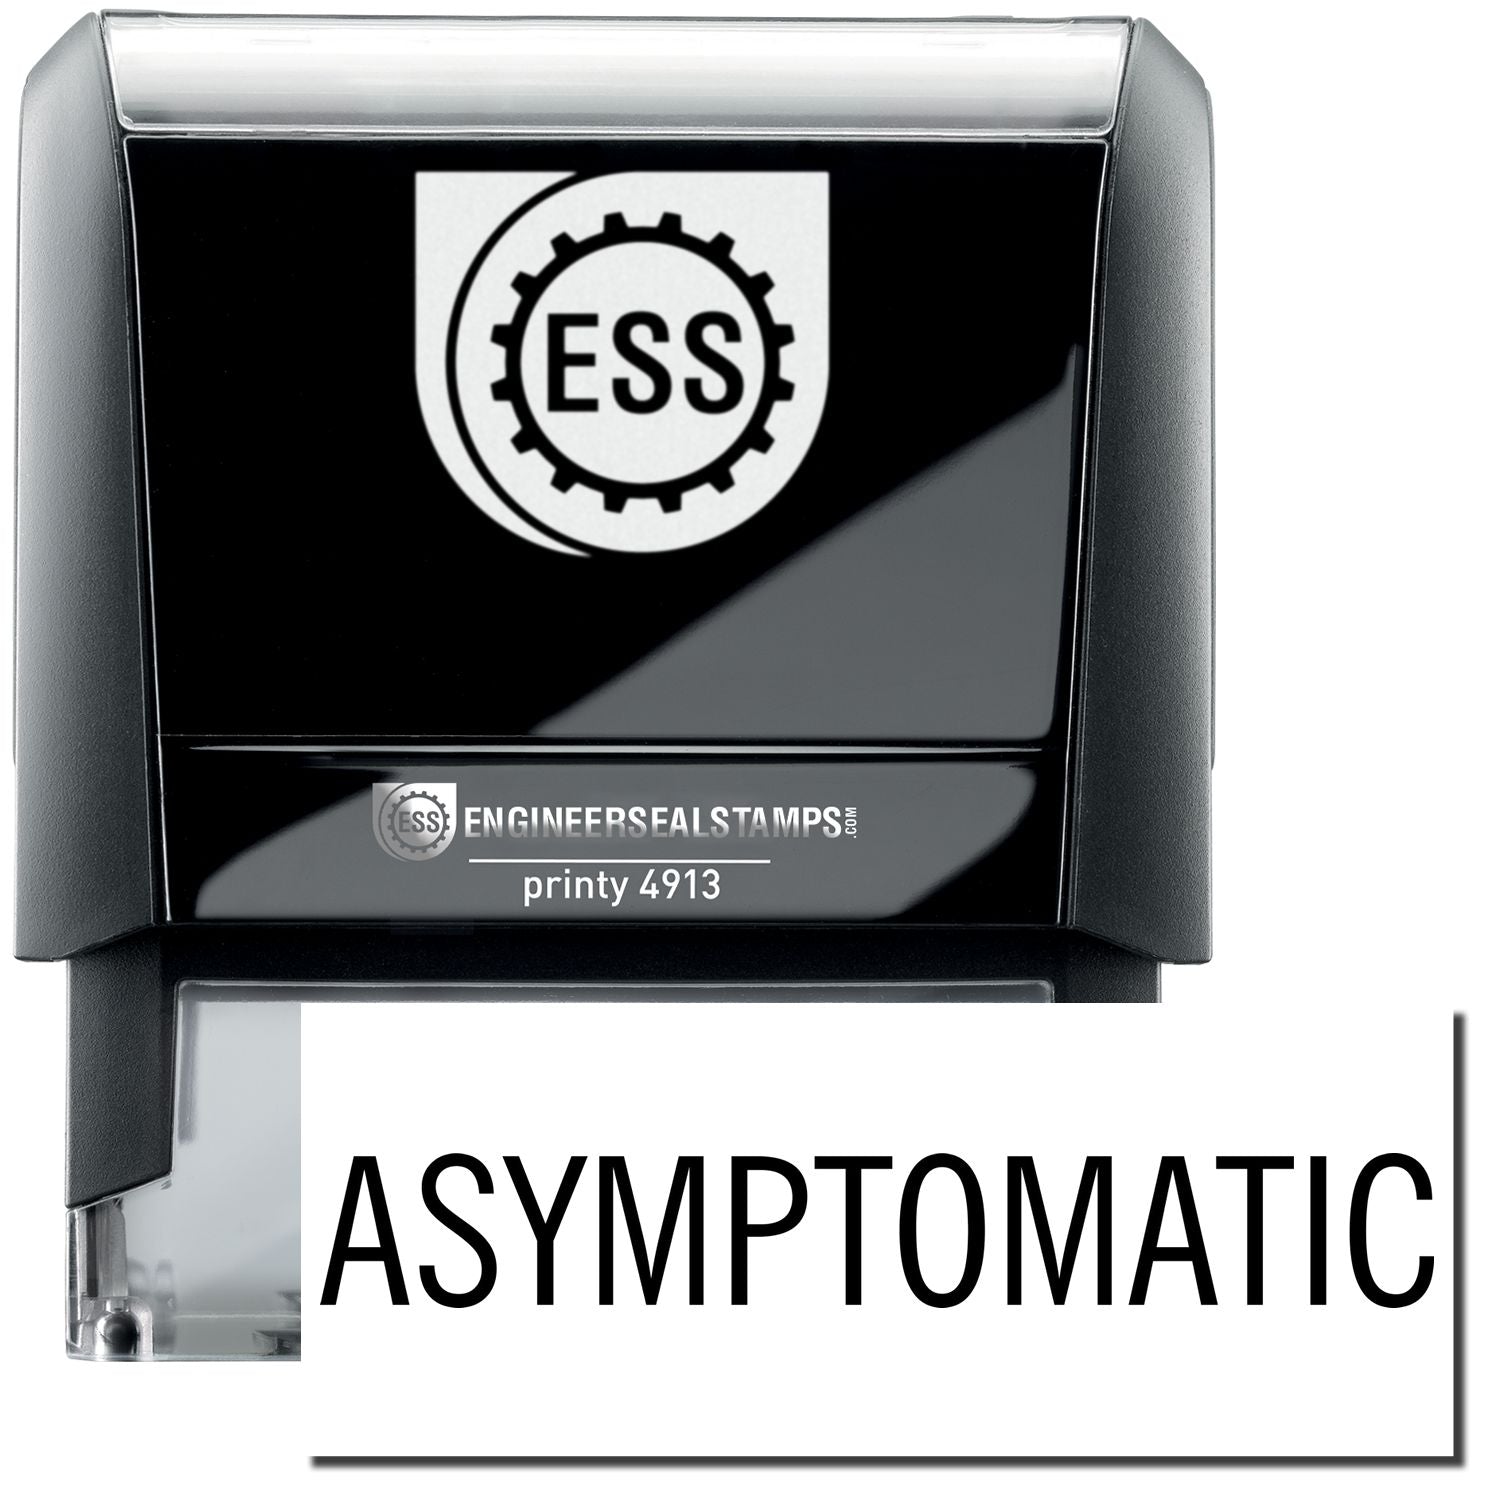 A self-inking stamp with a stamped image showing how the text "ASYMPTOMATIC" in a large font is displayed by it after stamping.